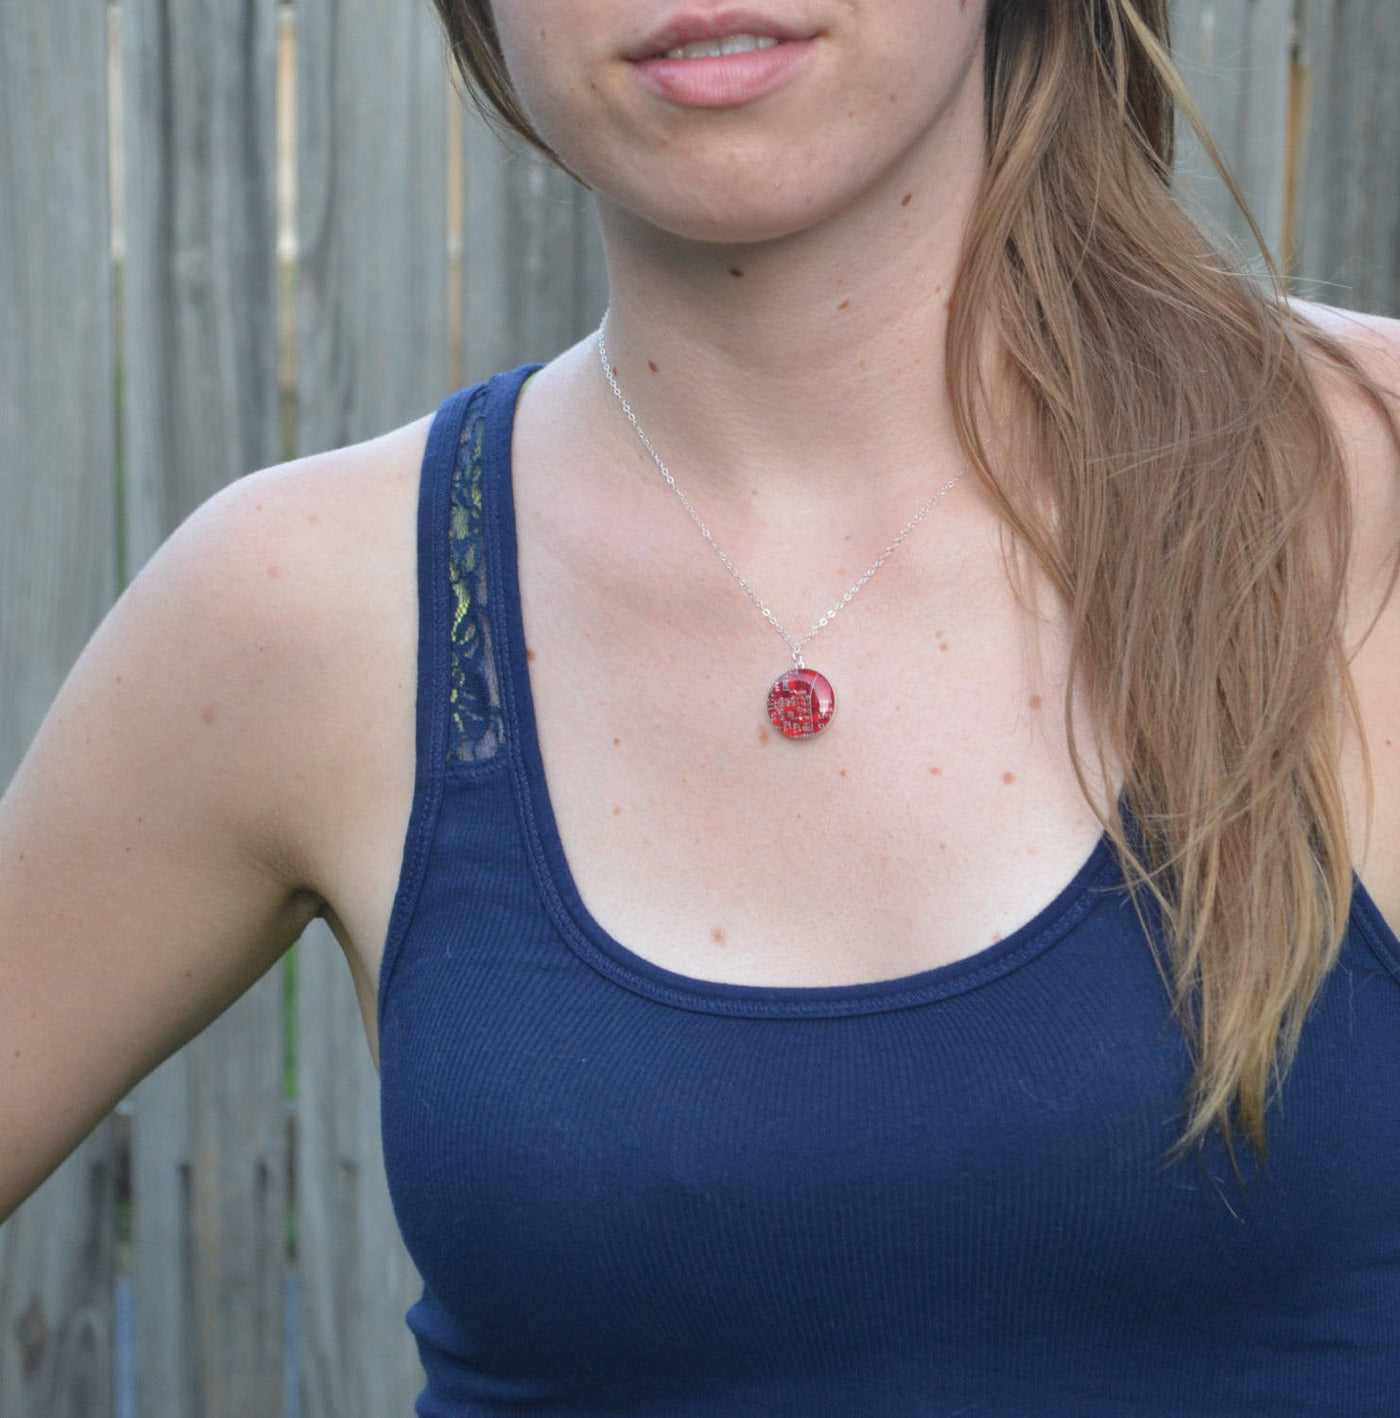 Red Circuit Board Necklace, Sterling Silver Necklace, Royal Blue Jewelry, Wearable Technology, Computer Engineer, Science Necklace, Nerdy